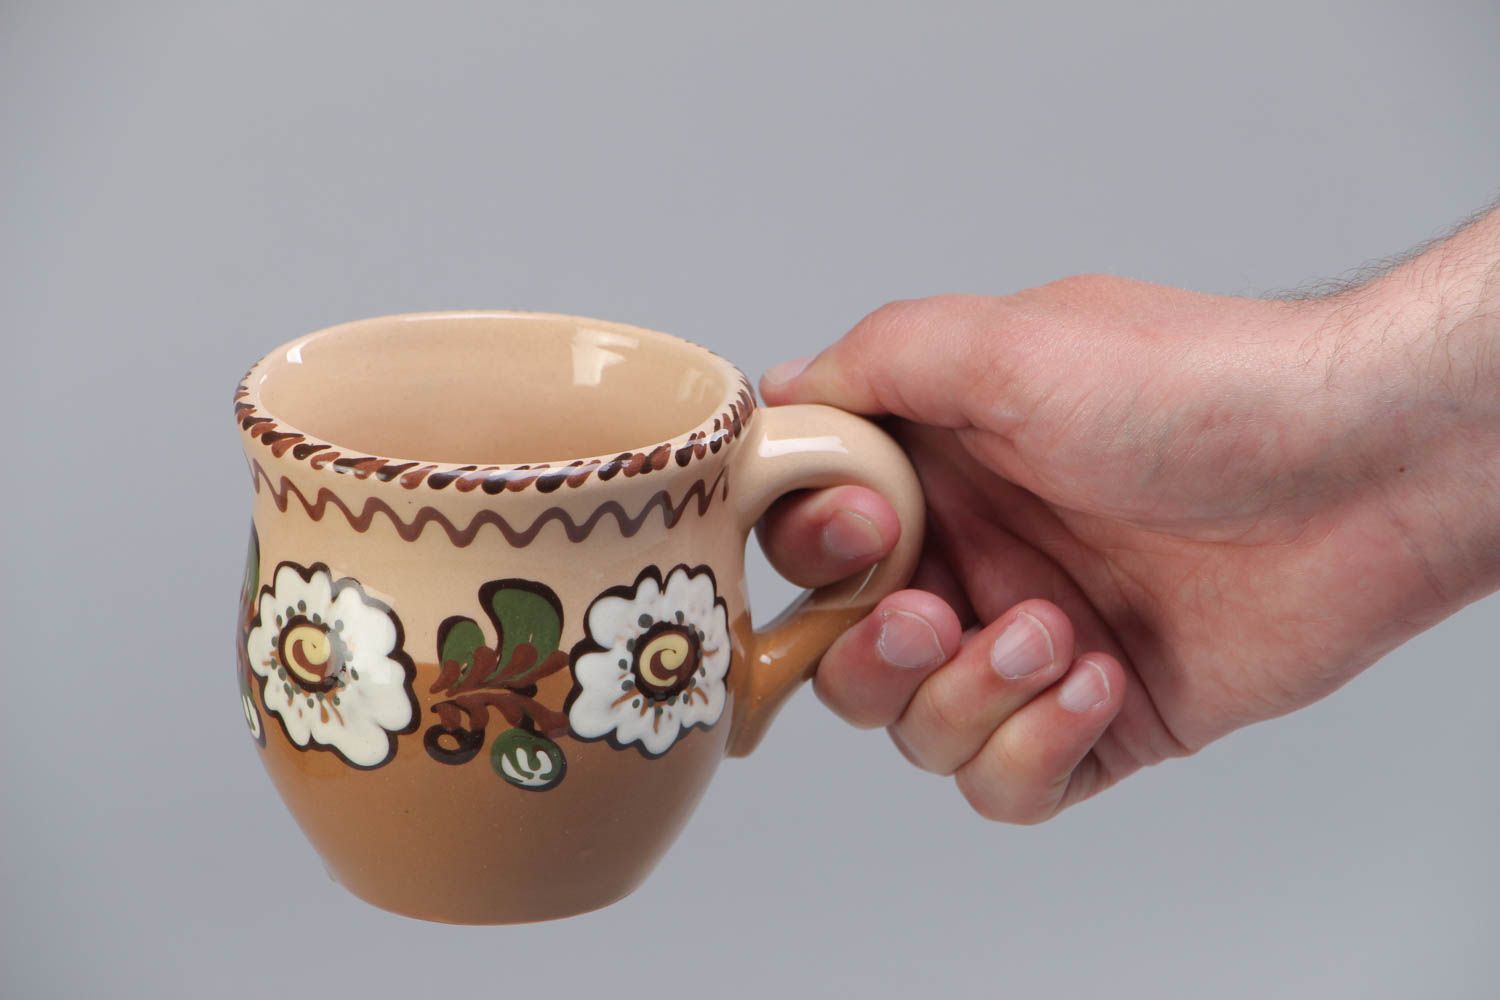 8 oz porcelain handmade coffee cup with handle and floral ornament 0,8 lb photo 5